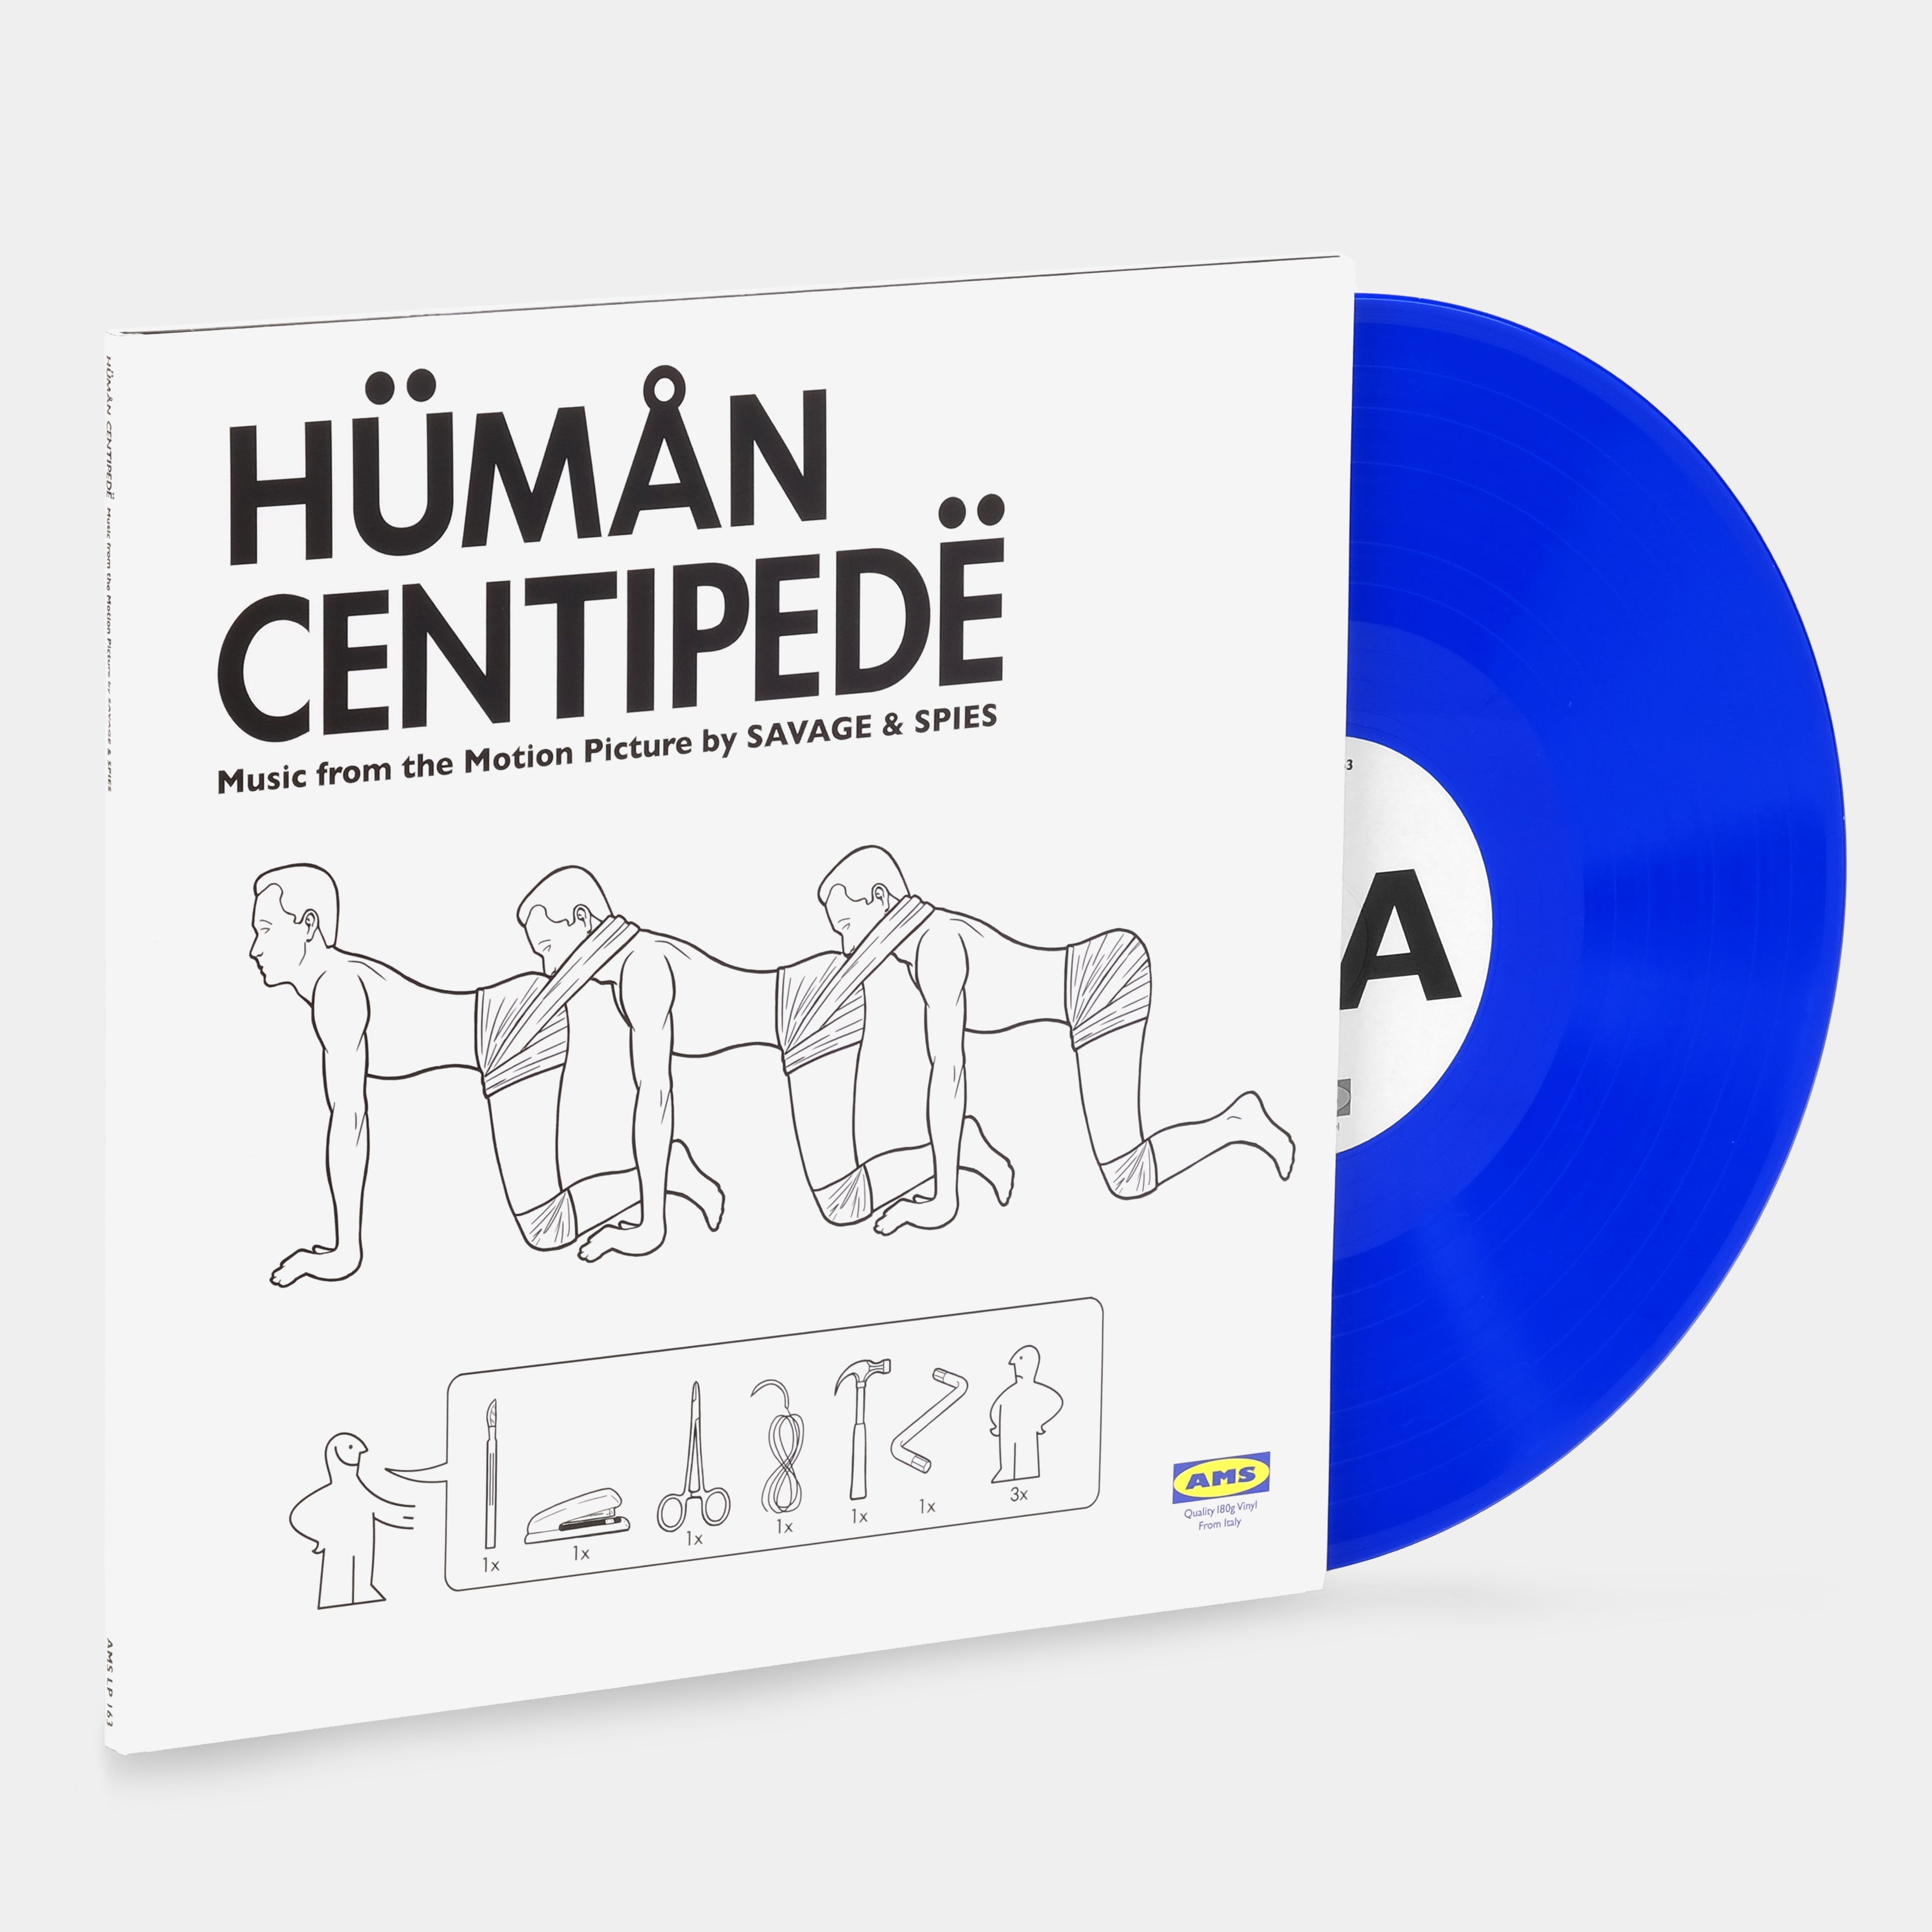 Savage & Spies - Human Centipede: Music From The Motion Picture LP Blue Vinyl Record